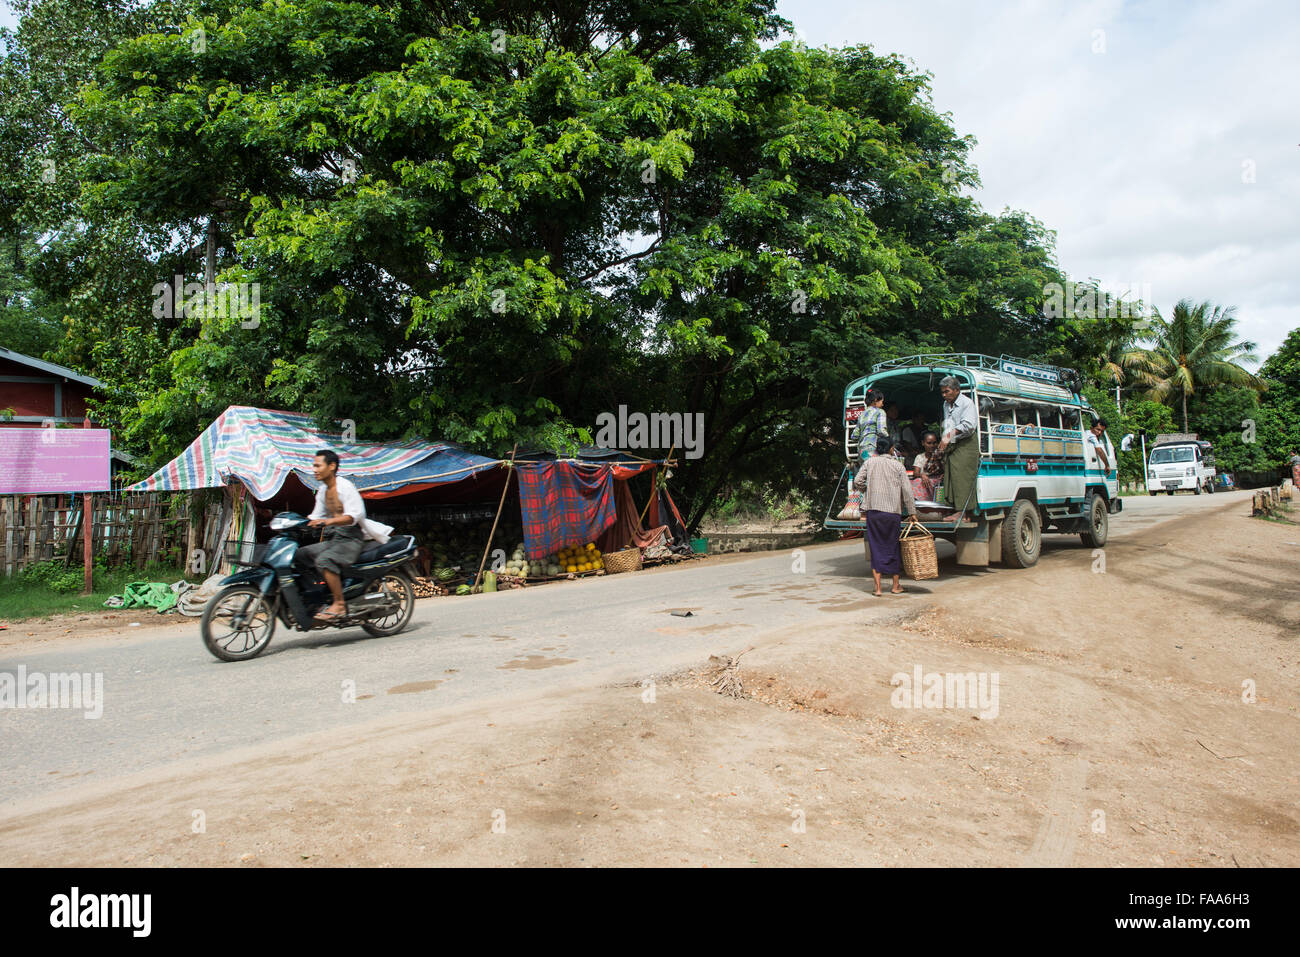 Myinkaba Village, a small local village that lies between Old Bagan and New Bagan in Myanmar. Stock Photo